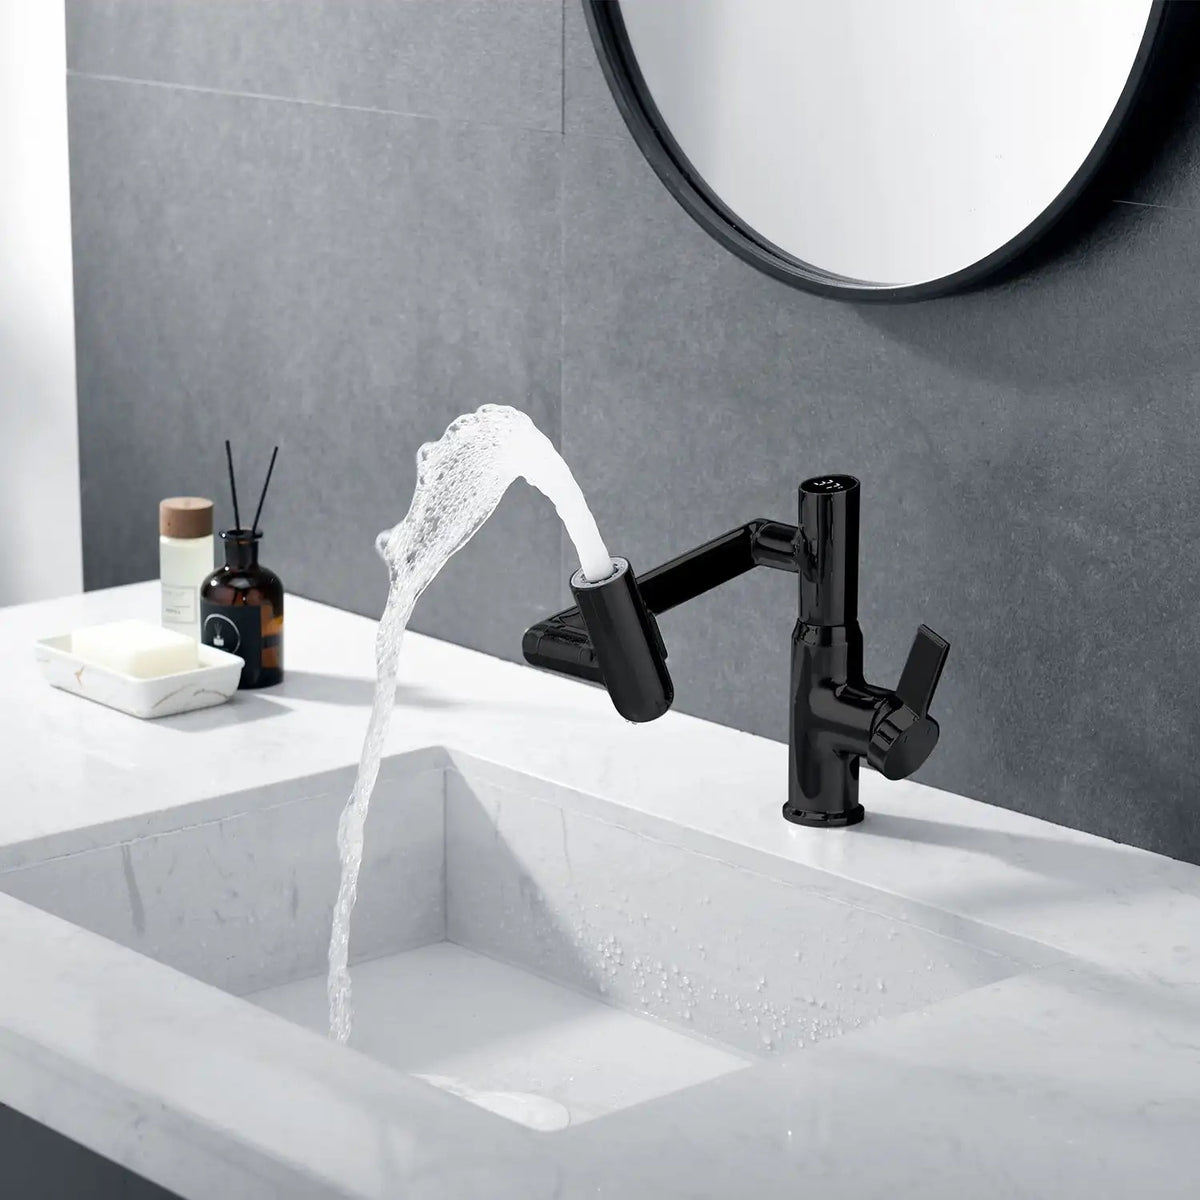 Leiden - Smart Rotating Bathroom Faucet With Temperature Display